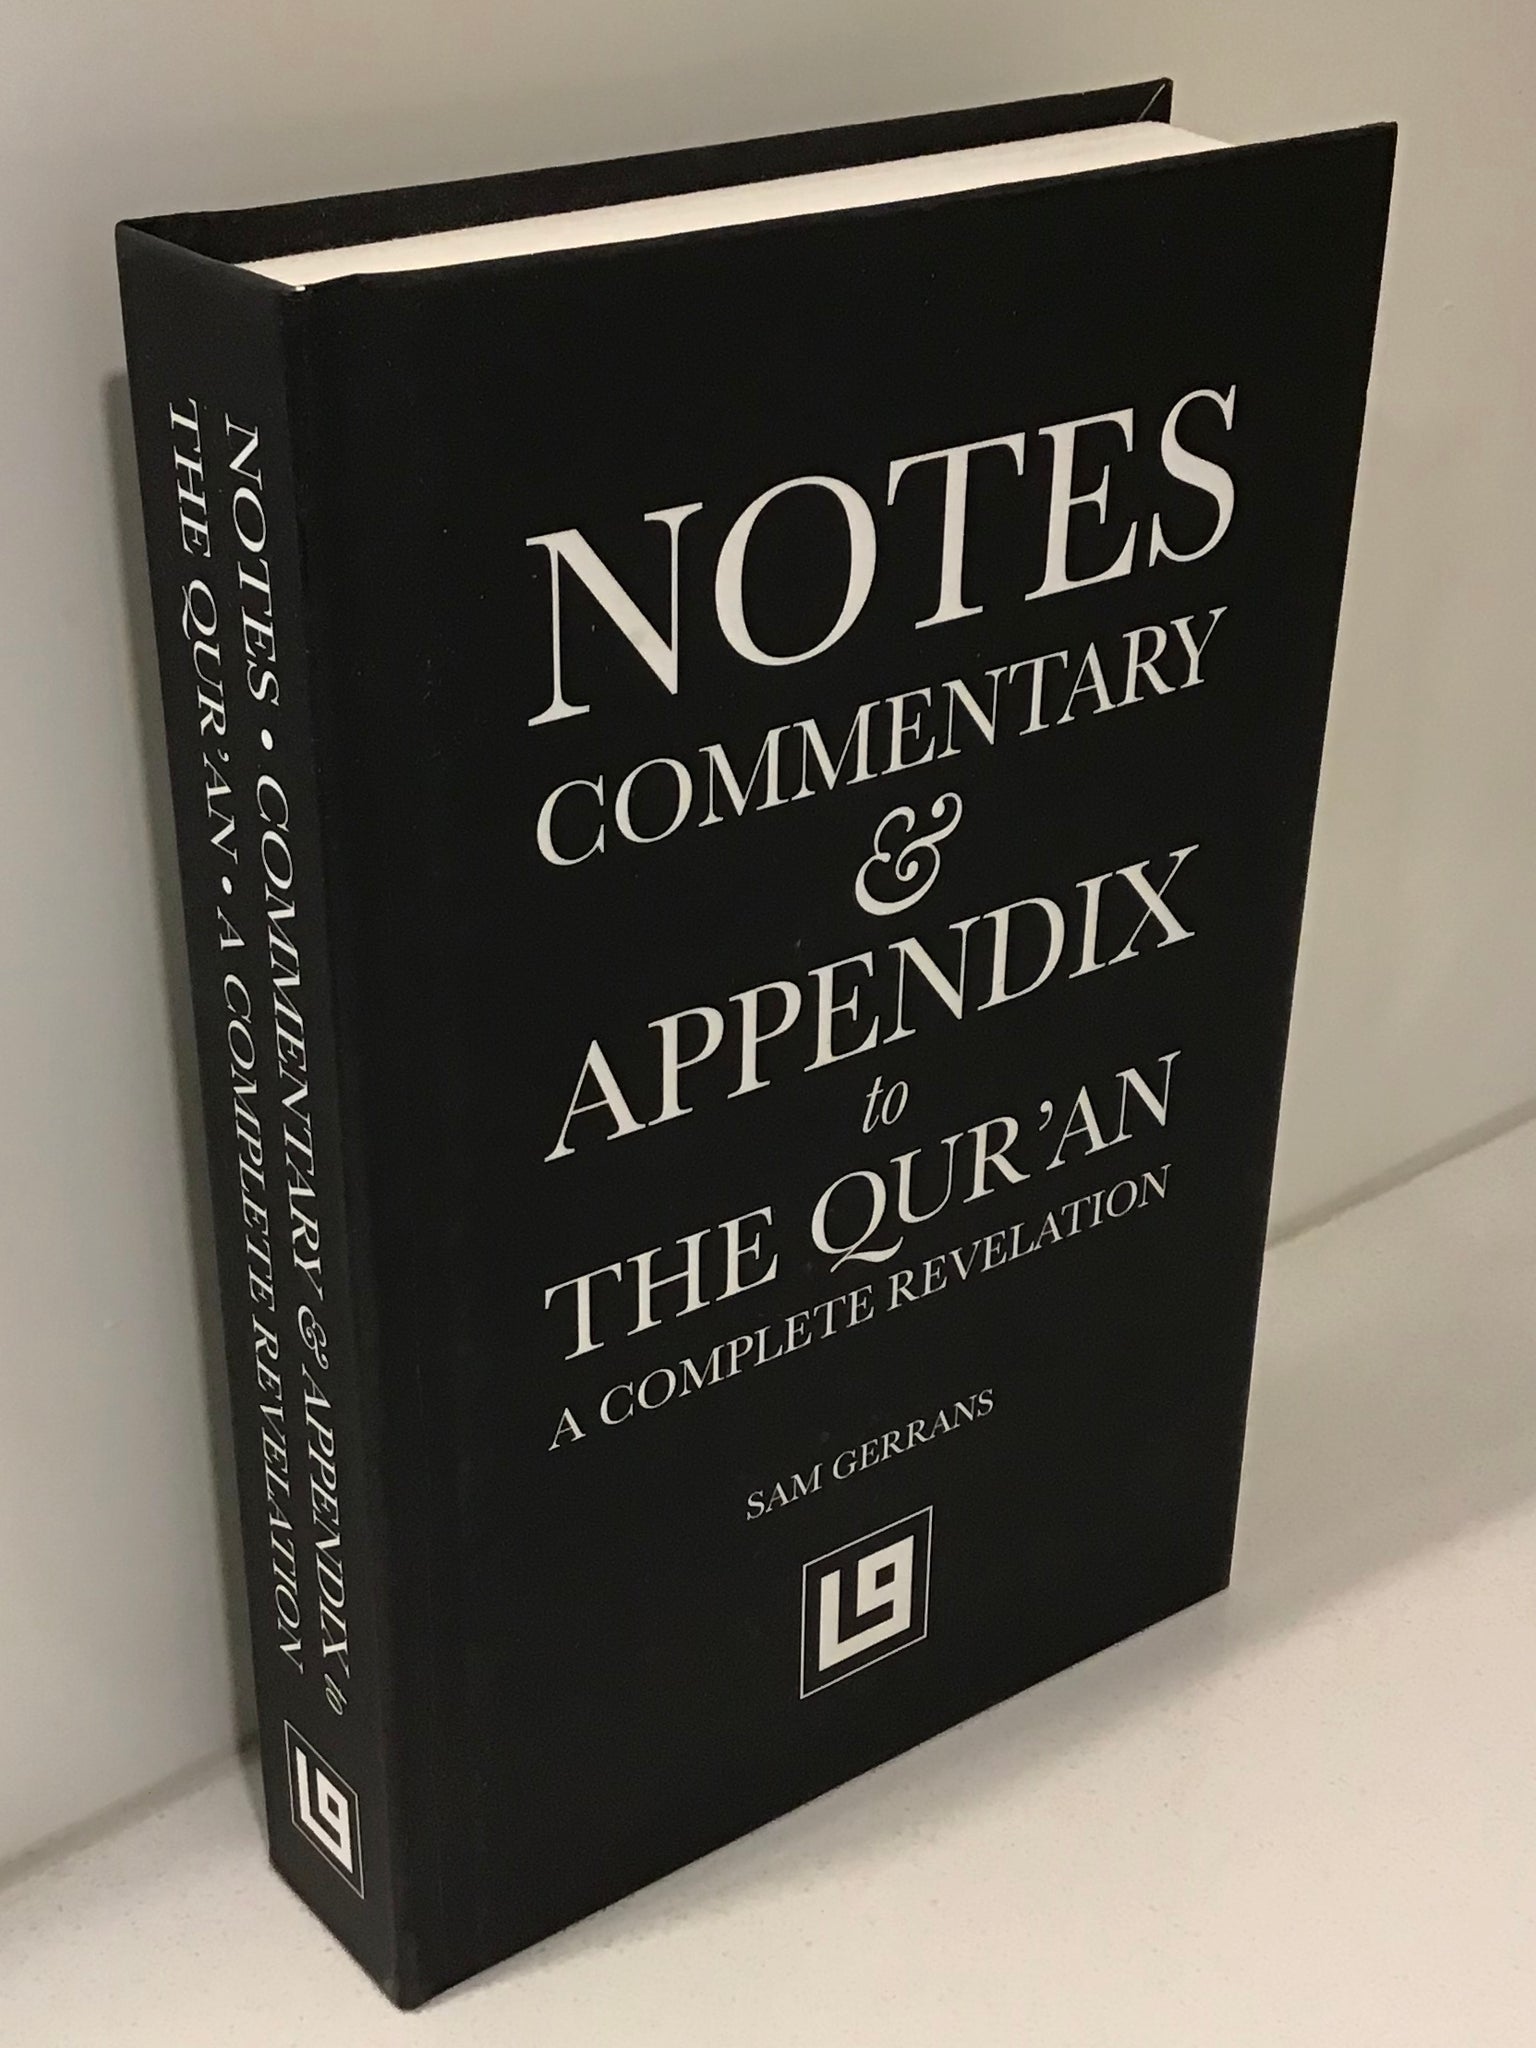 Notes, Commentary & Appendix to The Qur'an: A Complete Revelation